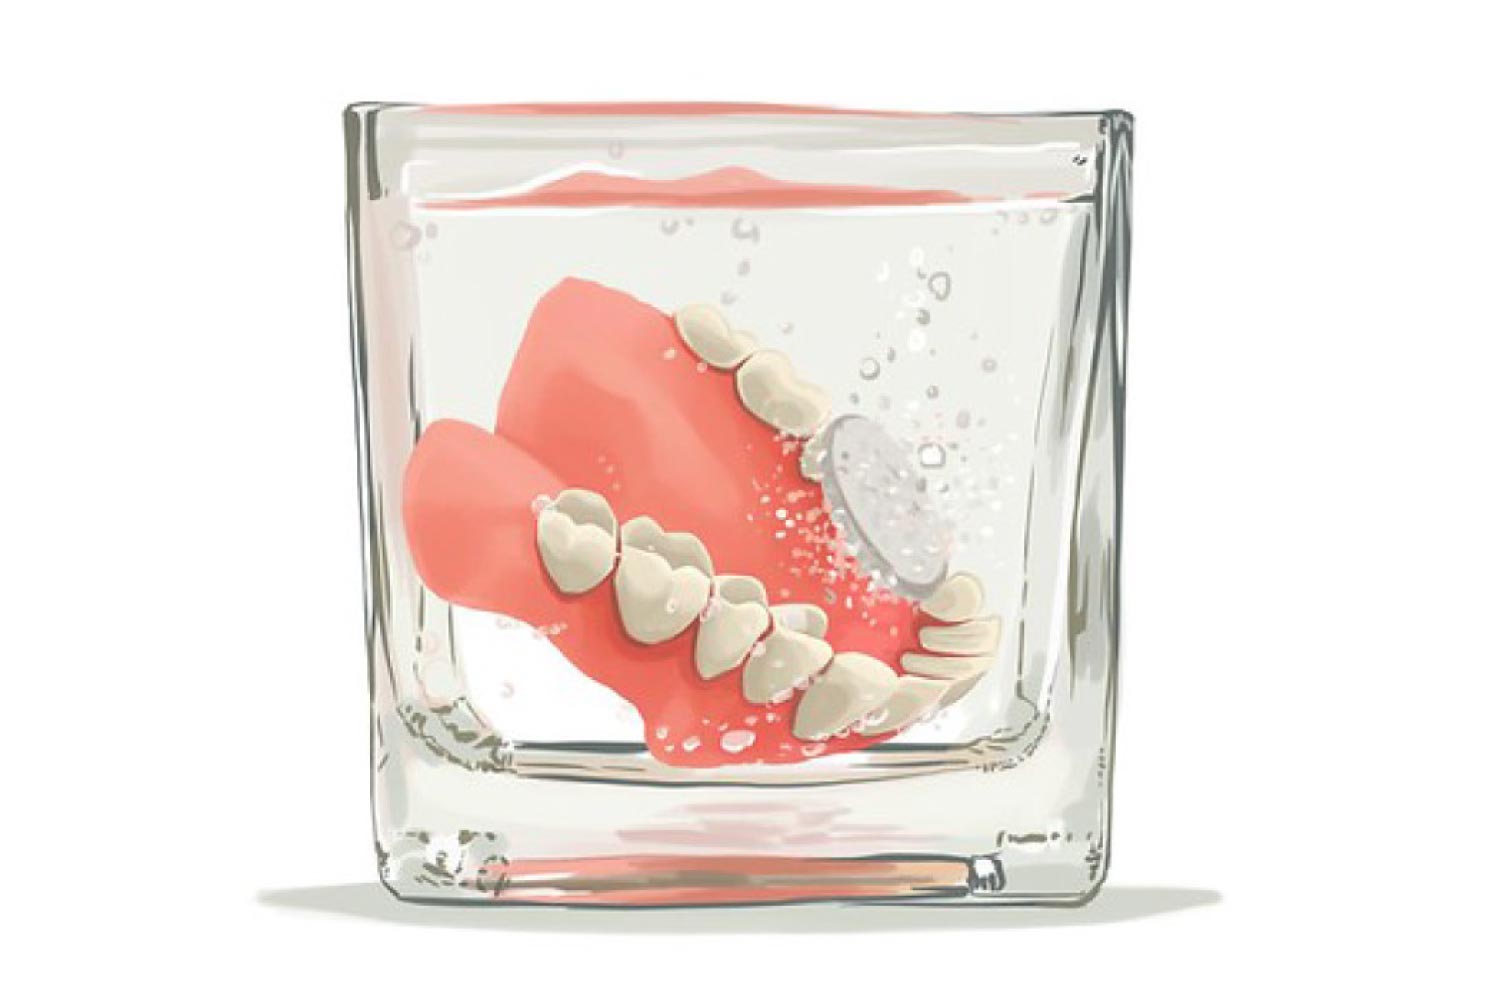 Dentures sitting in a glass getting cleaned.